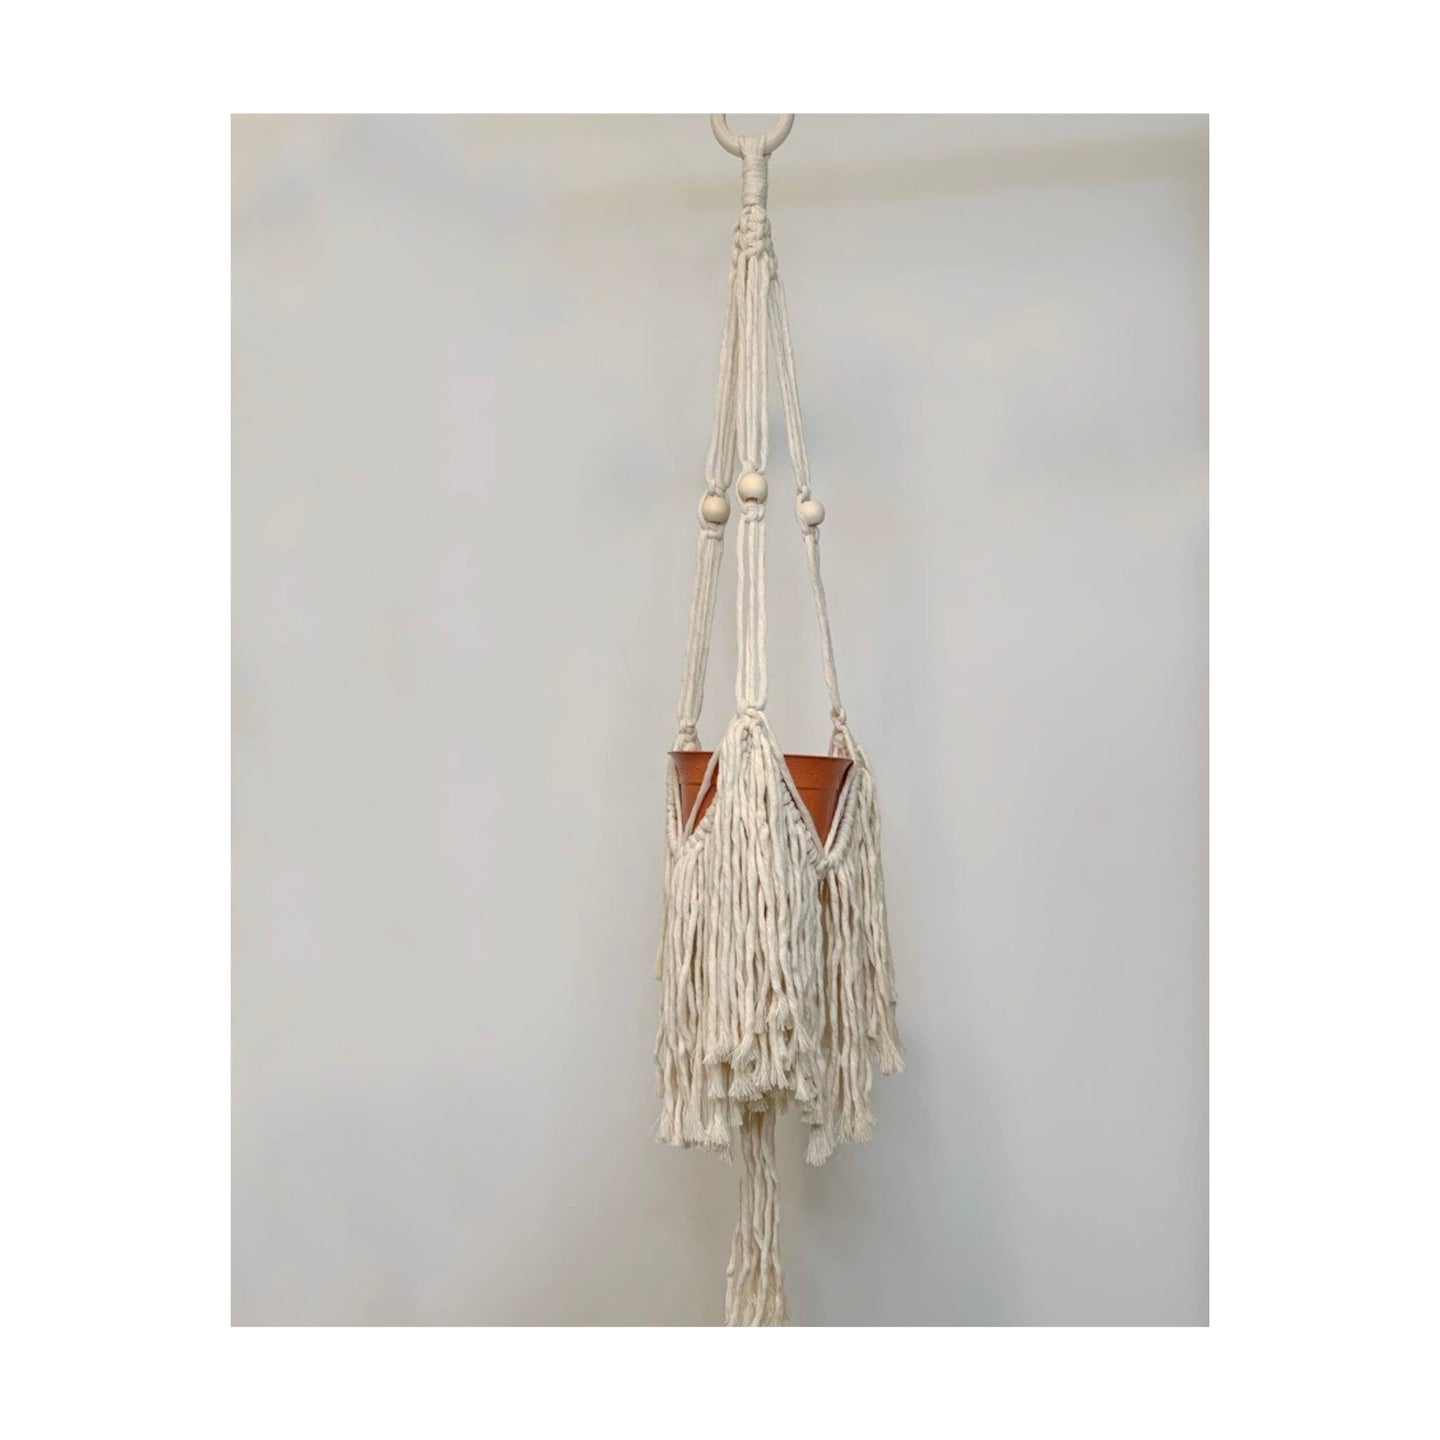 Mini Blanche design has a stylish flare to it with the option of three spiral strands or go with the straight cord design. There are a few wooden beads and fun fringe at the bottom.